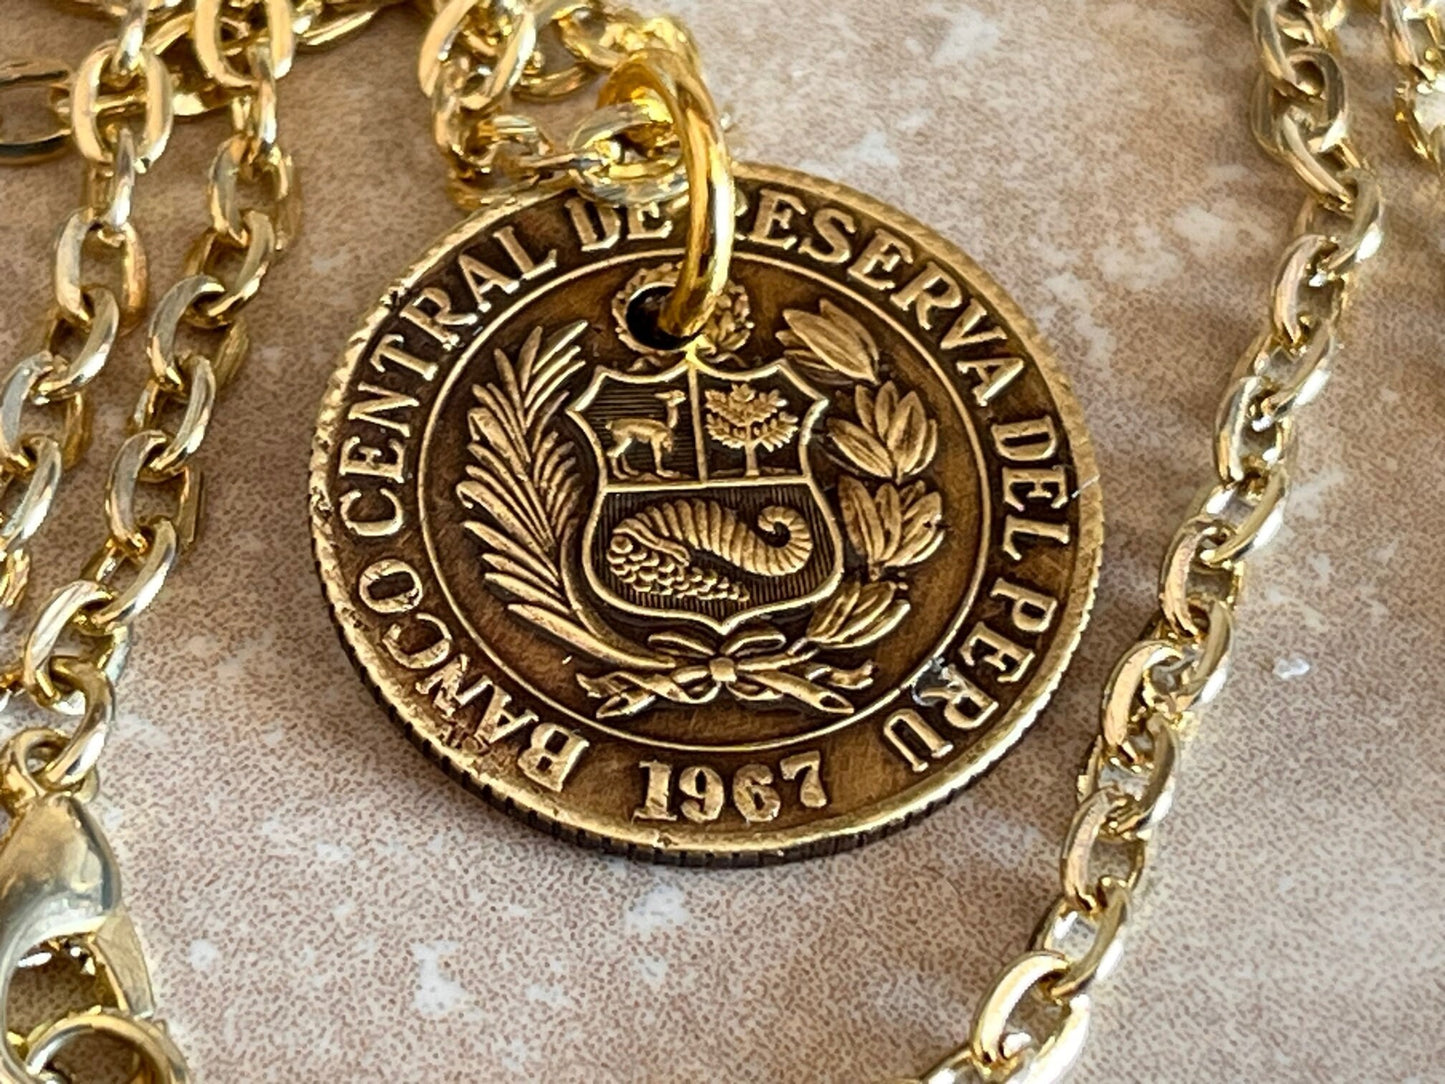 Peru Coin Pendant Peruvian 25 Centavos Personal Necklace Old Vintage Handmade Jewelry Gift Friend Charm For Him Her World Coin Collector